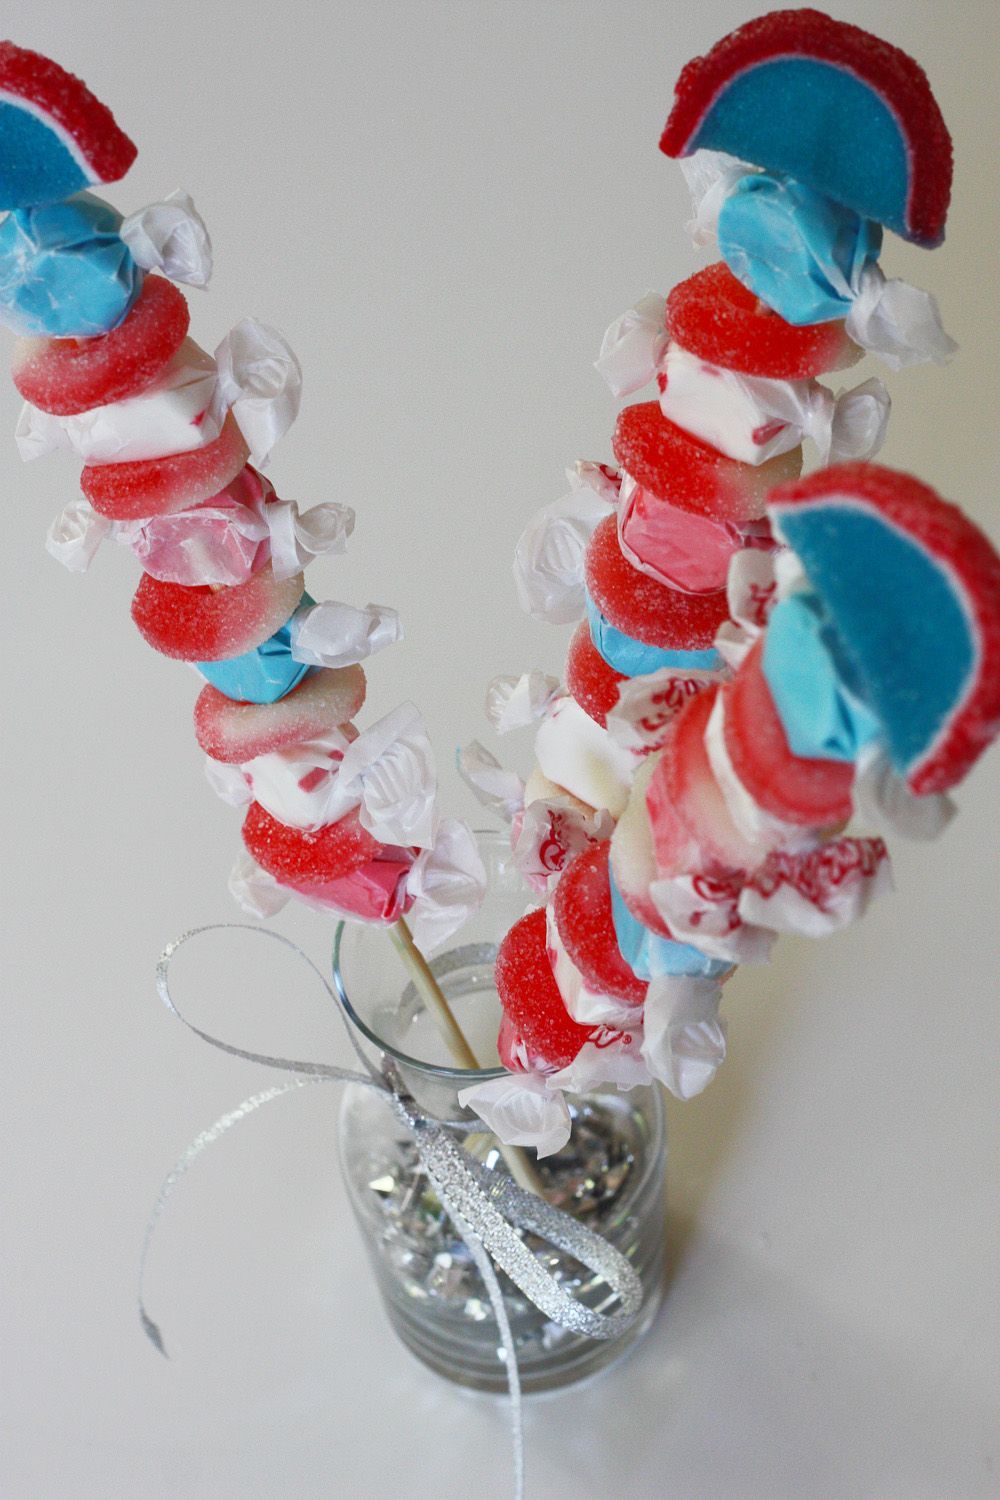 July 4th candy skewer centerpieces #july4th